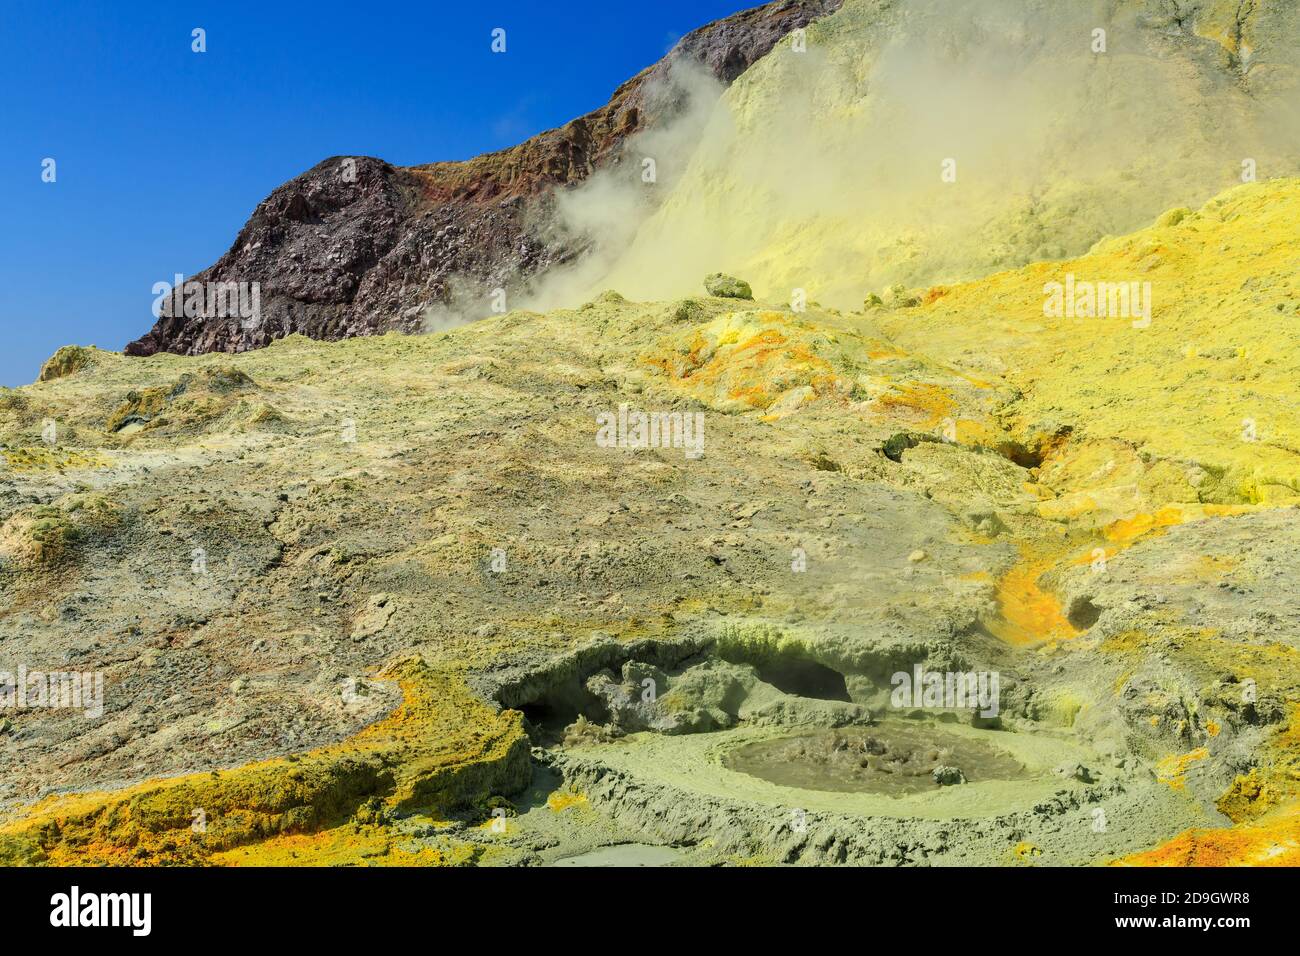 Landscape on White Island, an active volcano in the Bay of Plenty, New Zealand. A bubbling mudpot on a sulfur-stained hillside Stock Photo